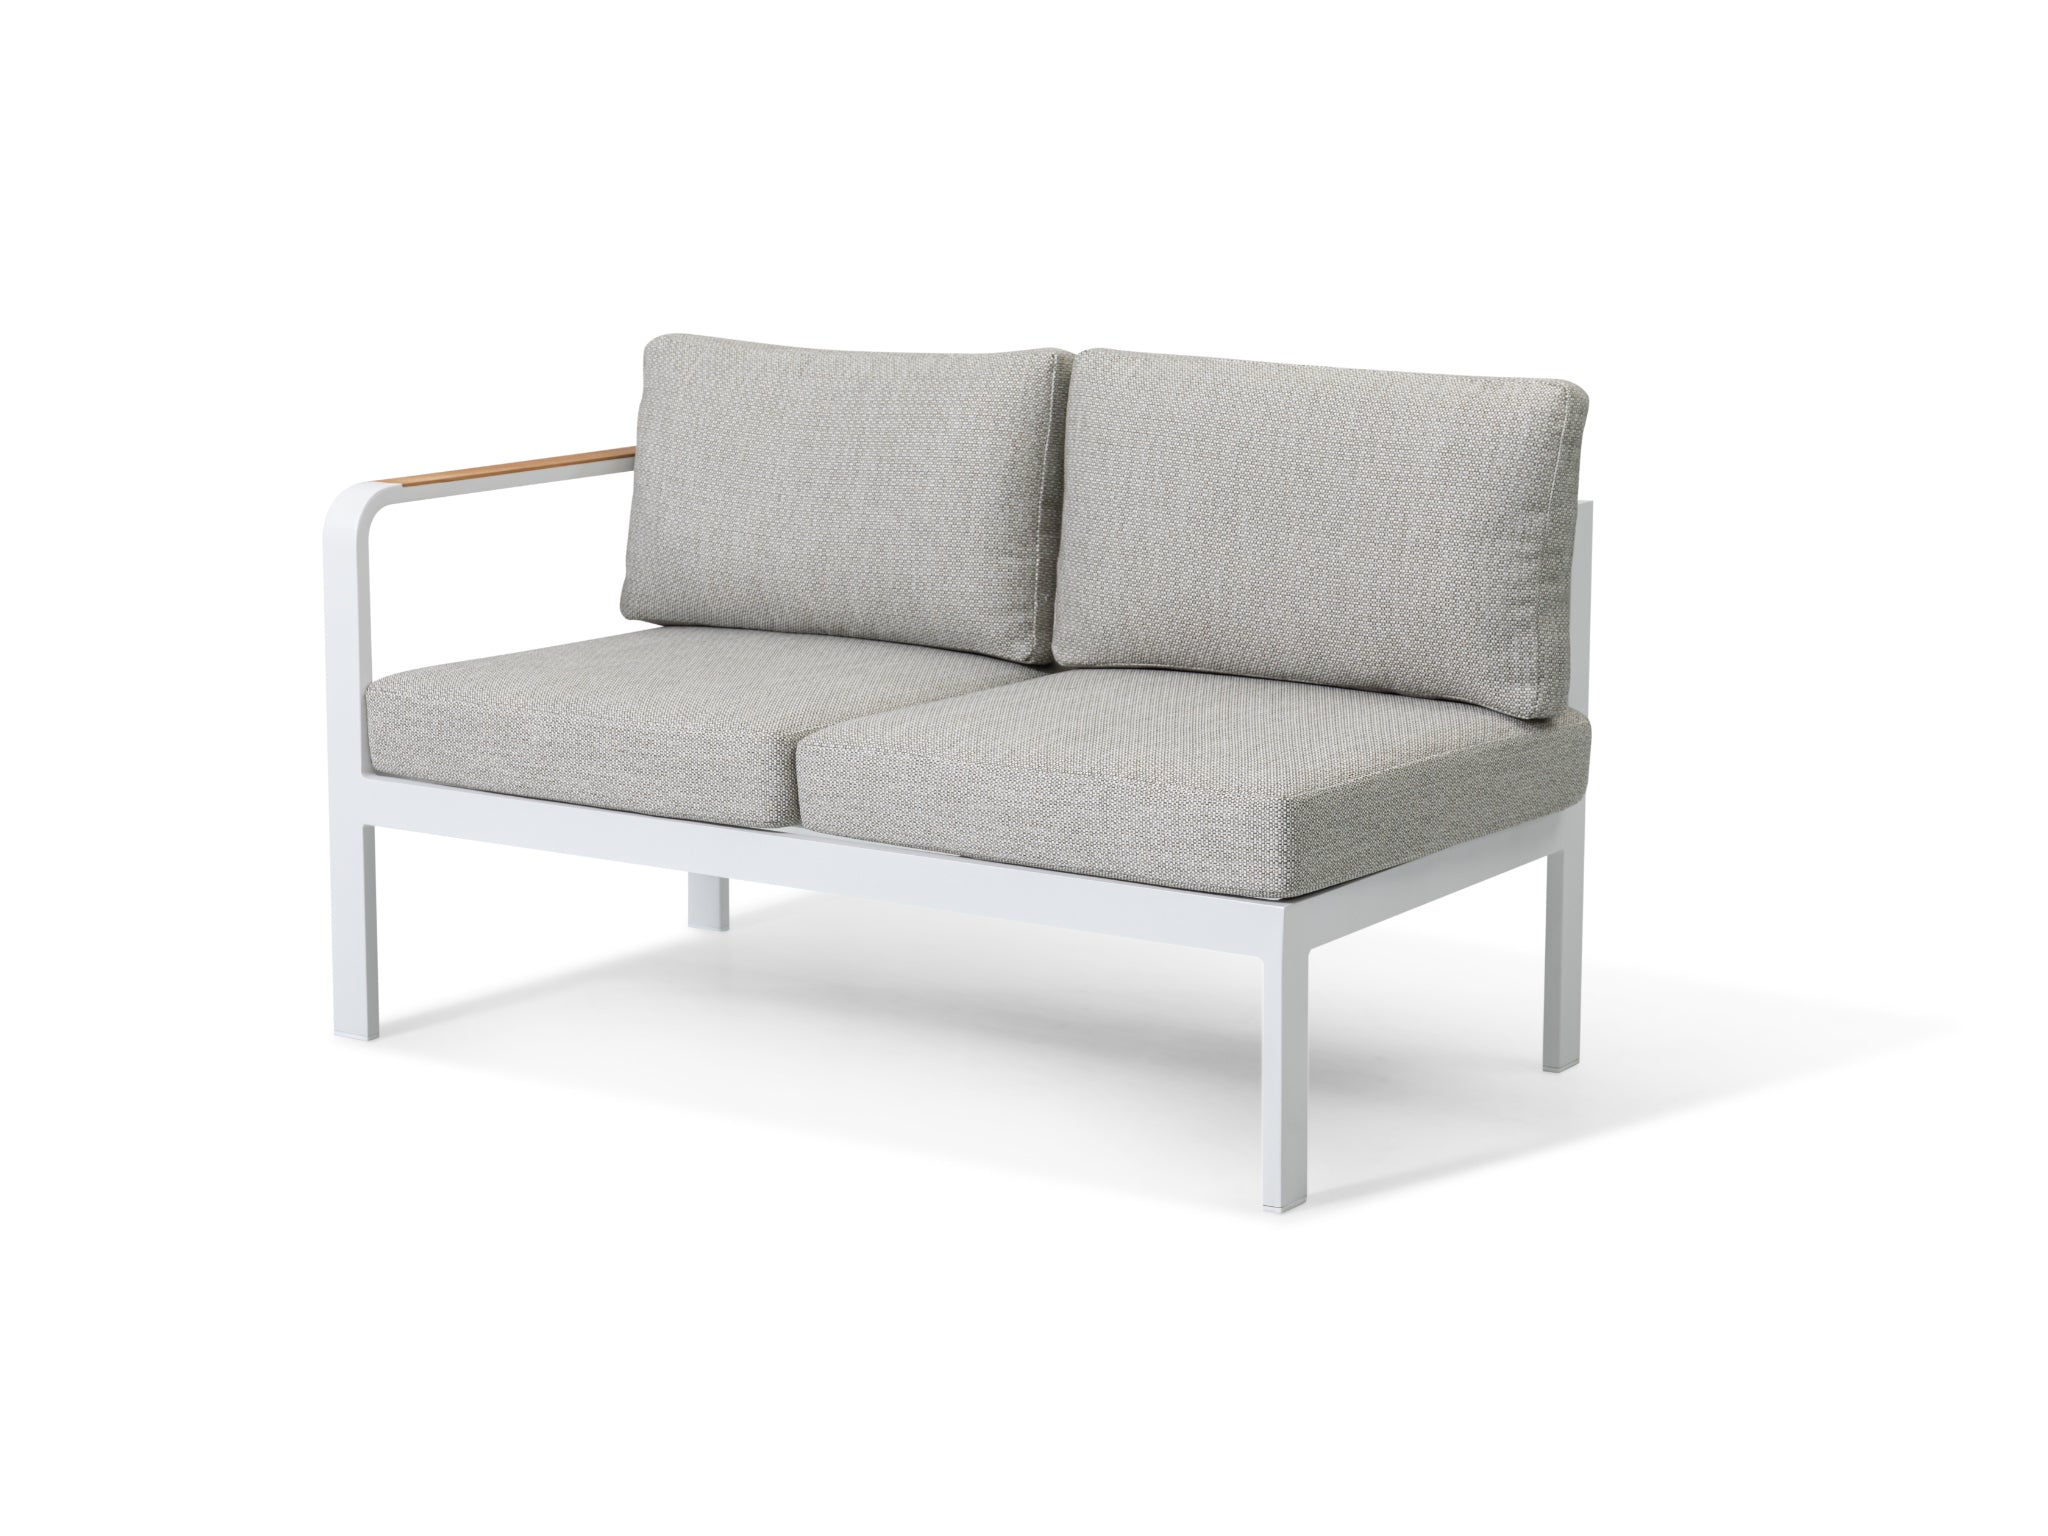 SIMPO by Sunlongarden Aegean 2-Seat Right Side Sofa